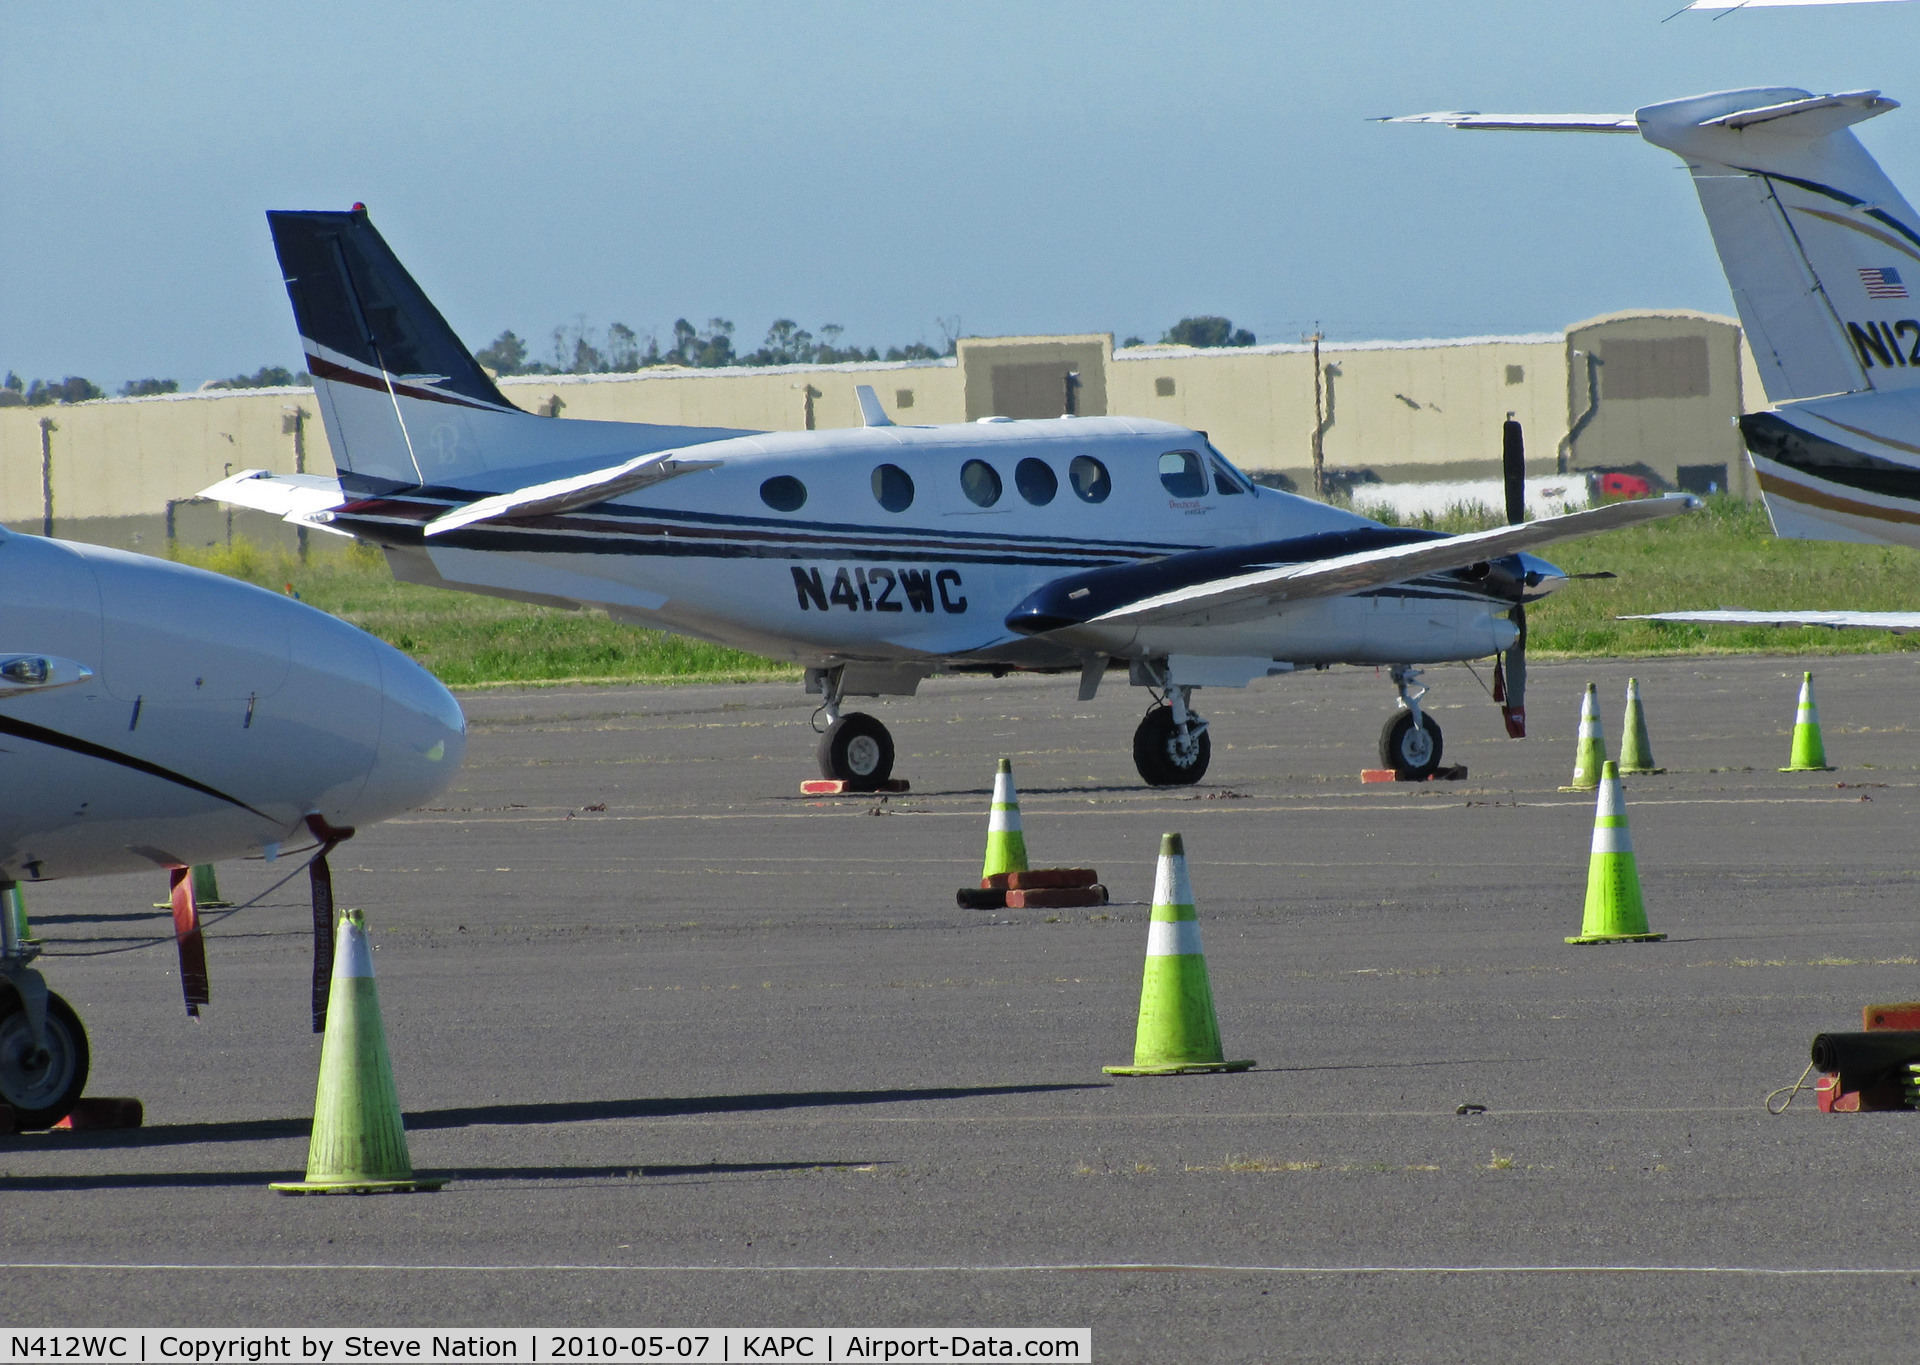 N412WC, Hawker Beechcraft Corp C90GTI King Air C/N LJ-1916, Surrounded by the yellow cones - Wilson Construction of Canby, OR operates this King Air C90GTI